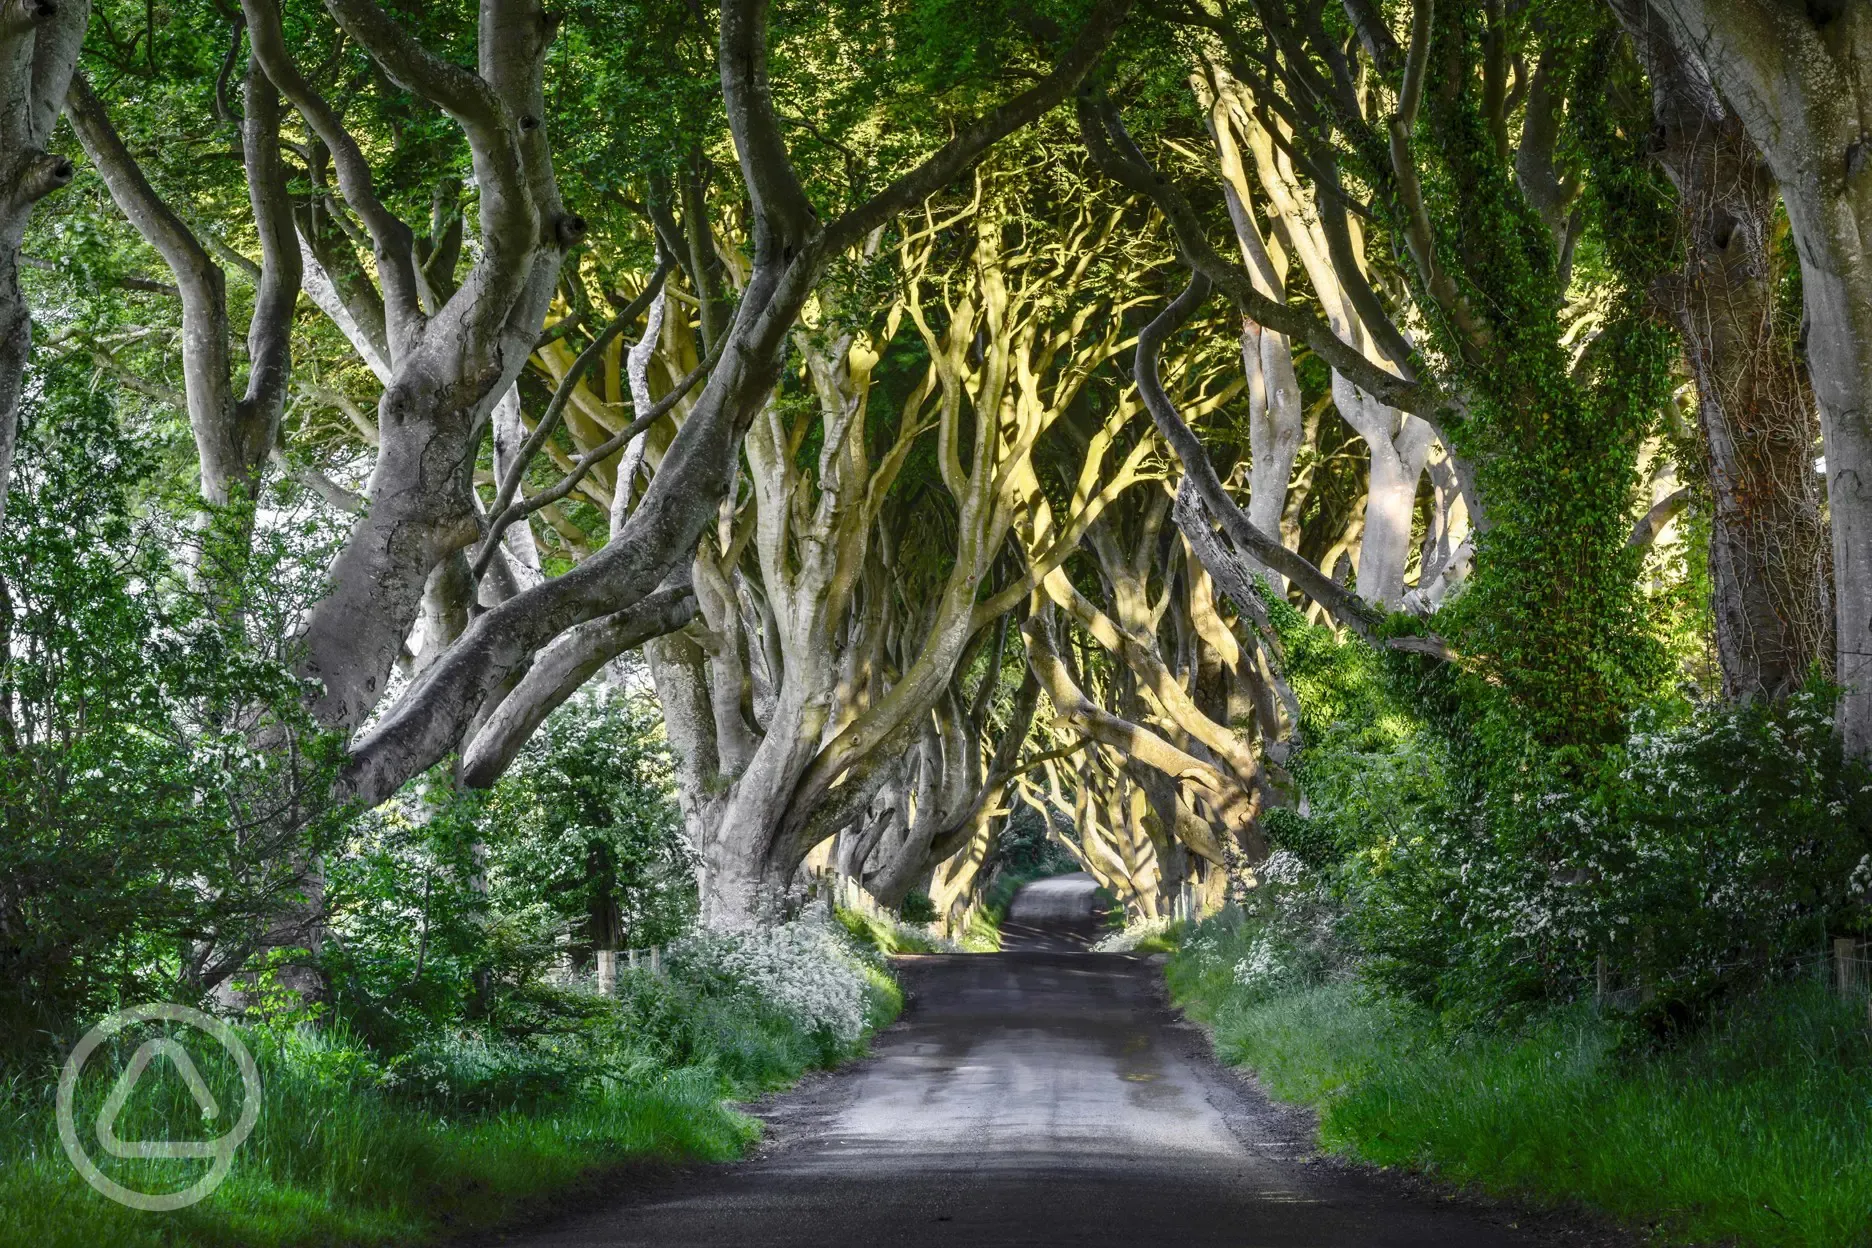 Visit the Dark Hedges, a film location for Game of Thrones